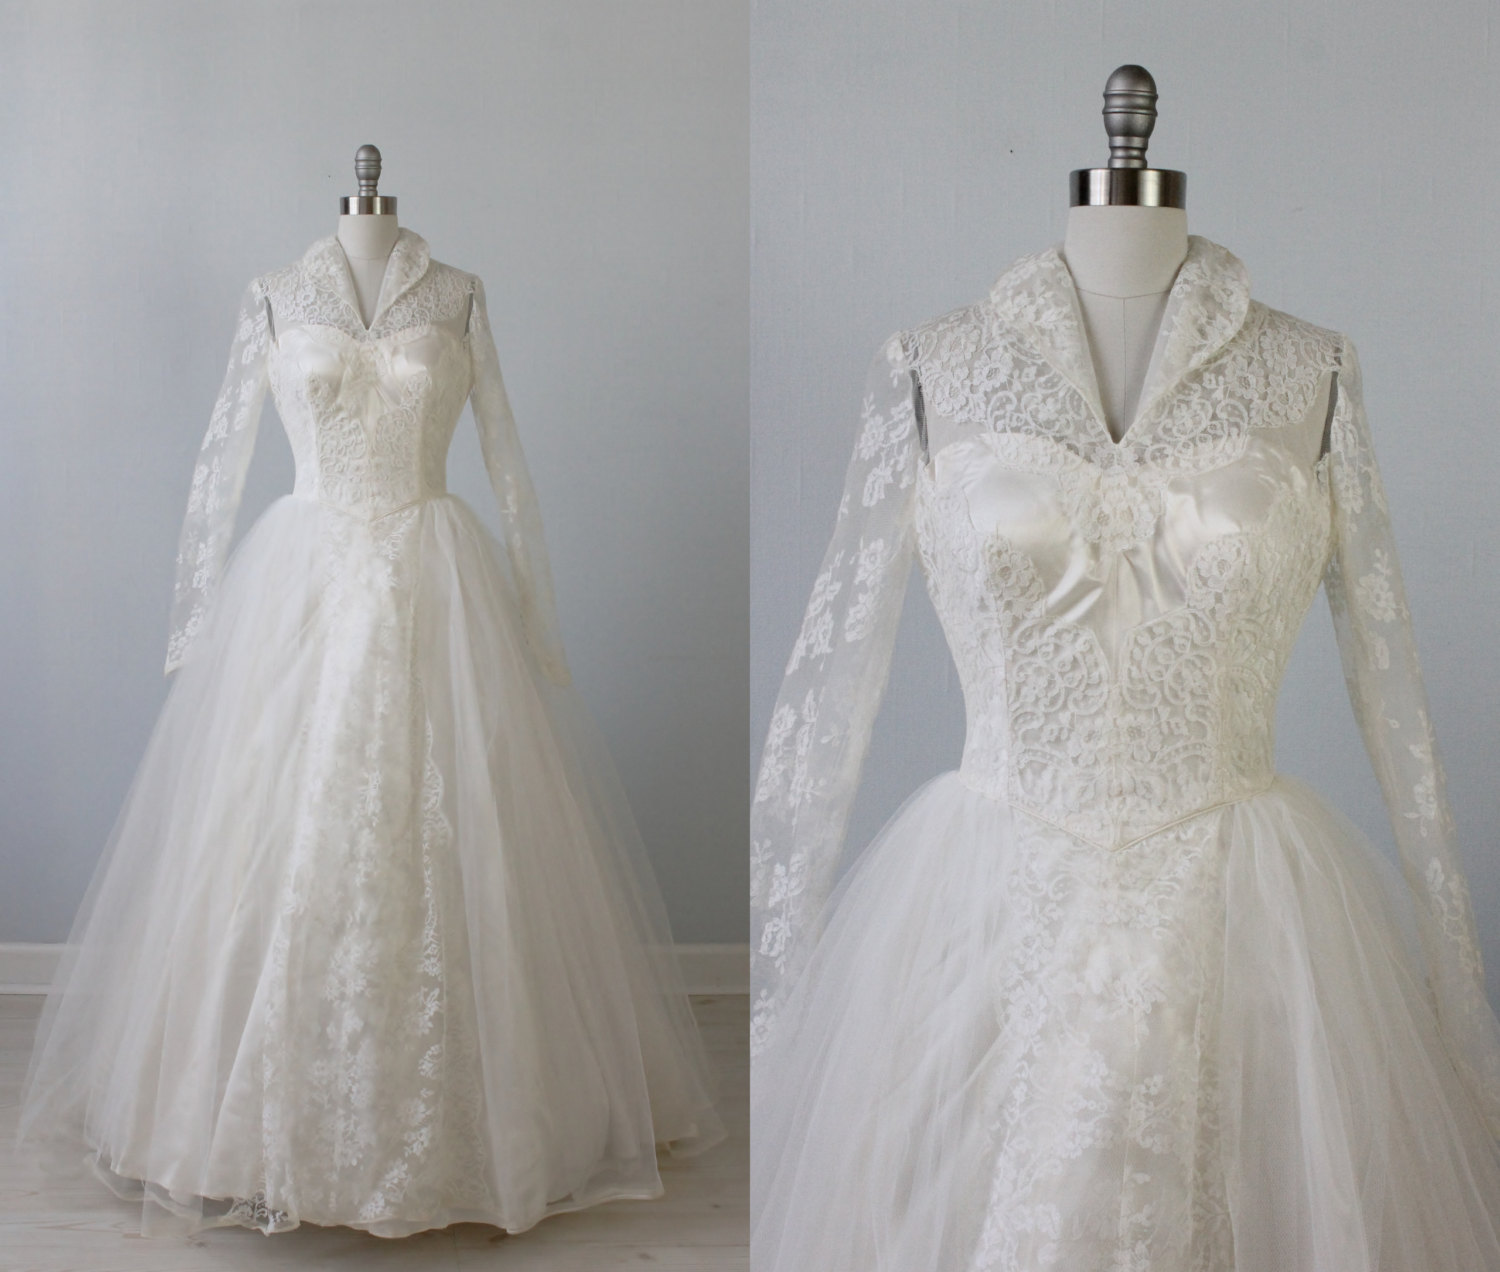 1950s Long Sleeve Wedding Dress from The Vintage Mistress